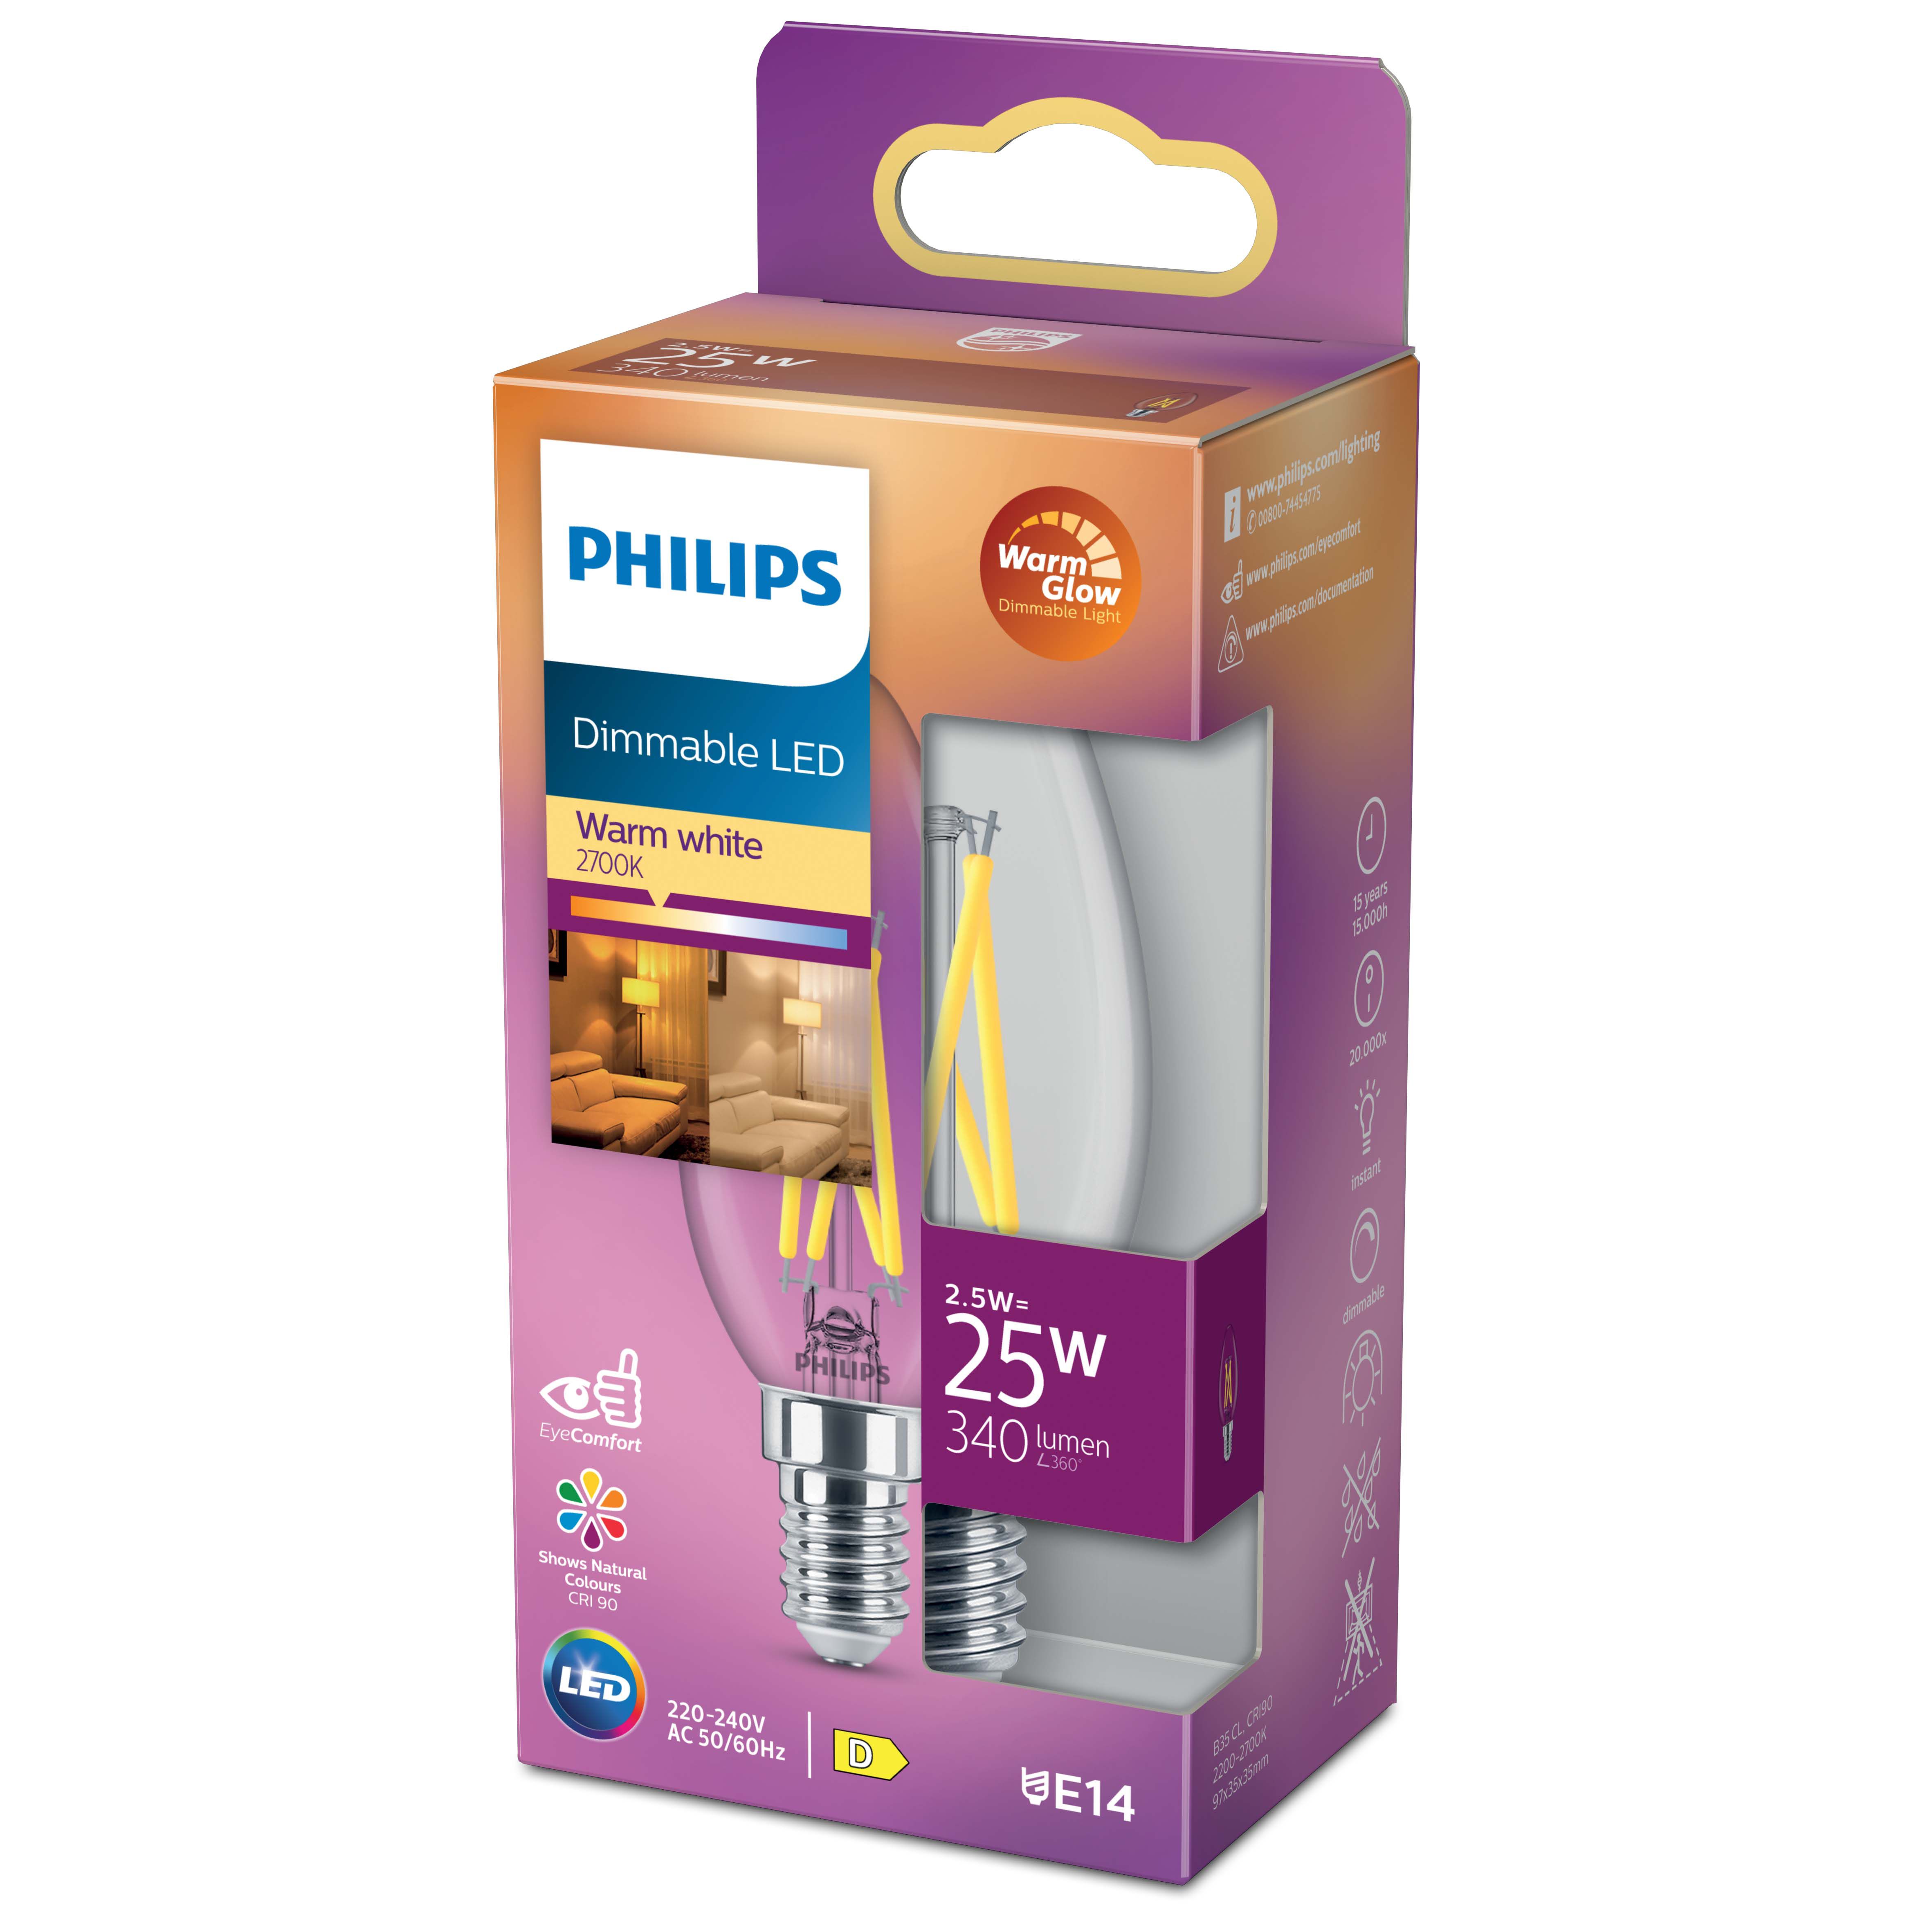 Philips Classic 2.7W 250lm Clear Candle Warm white LED Dimmable Light bulb